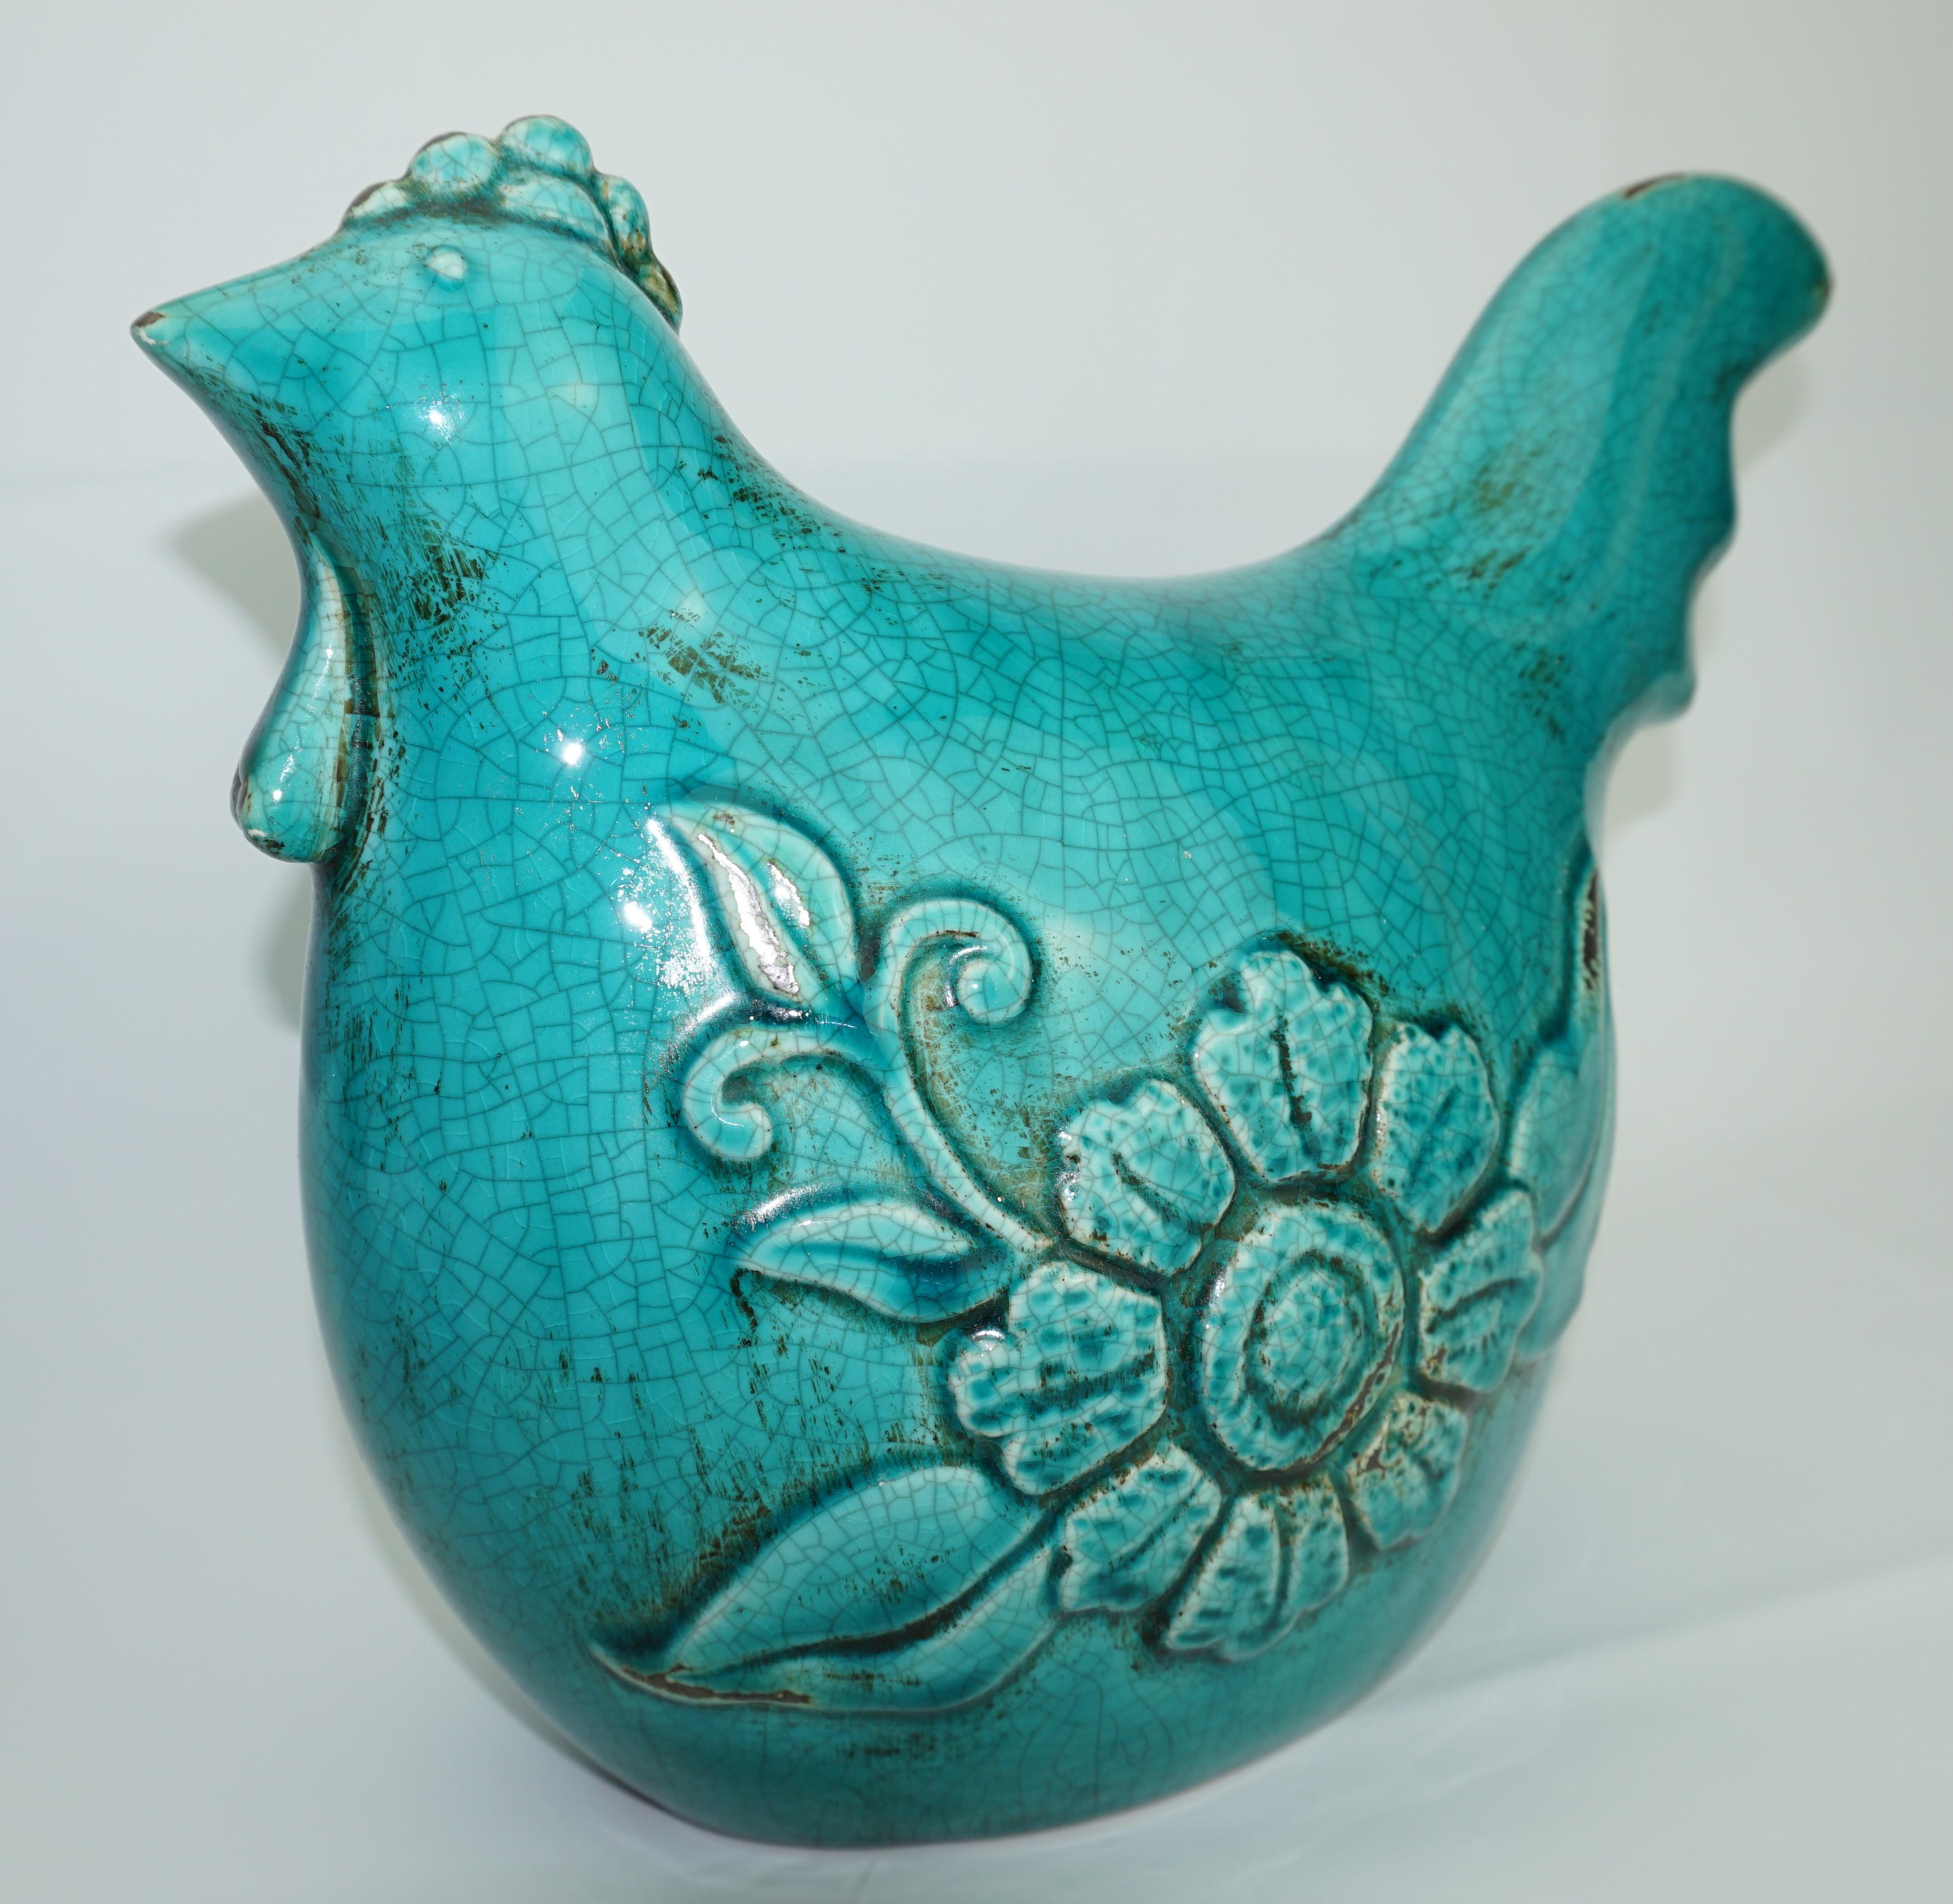 Ceramic midcentury hen, circa 1960, Denmark. Decorative turquoise hen with a floral pattern in a rustic quality.